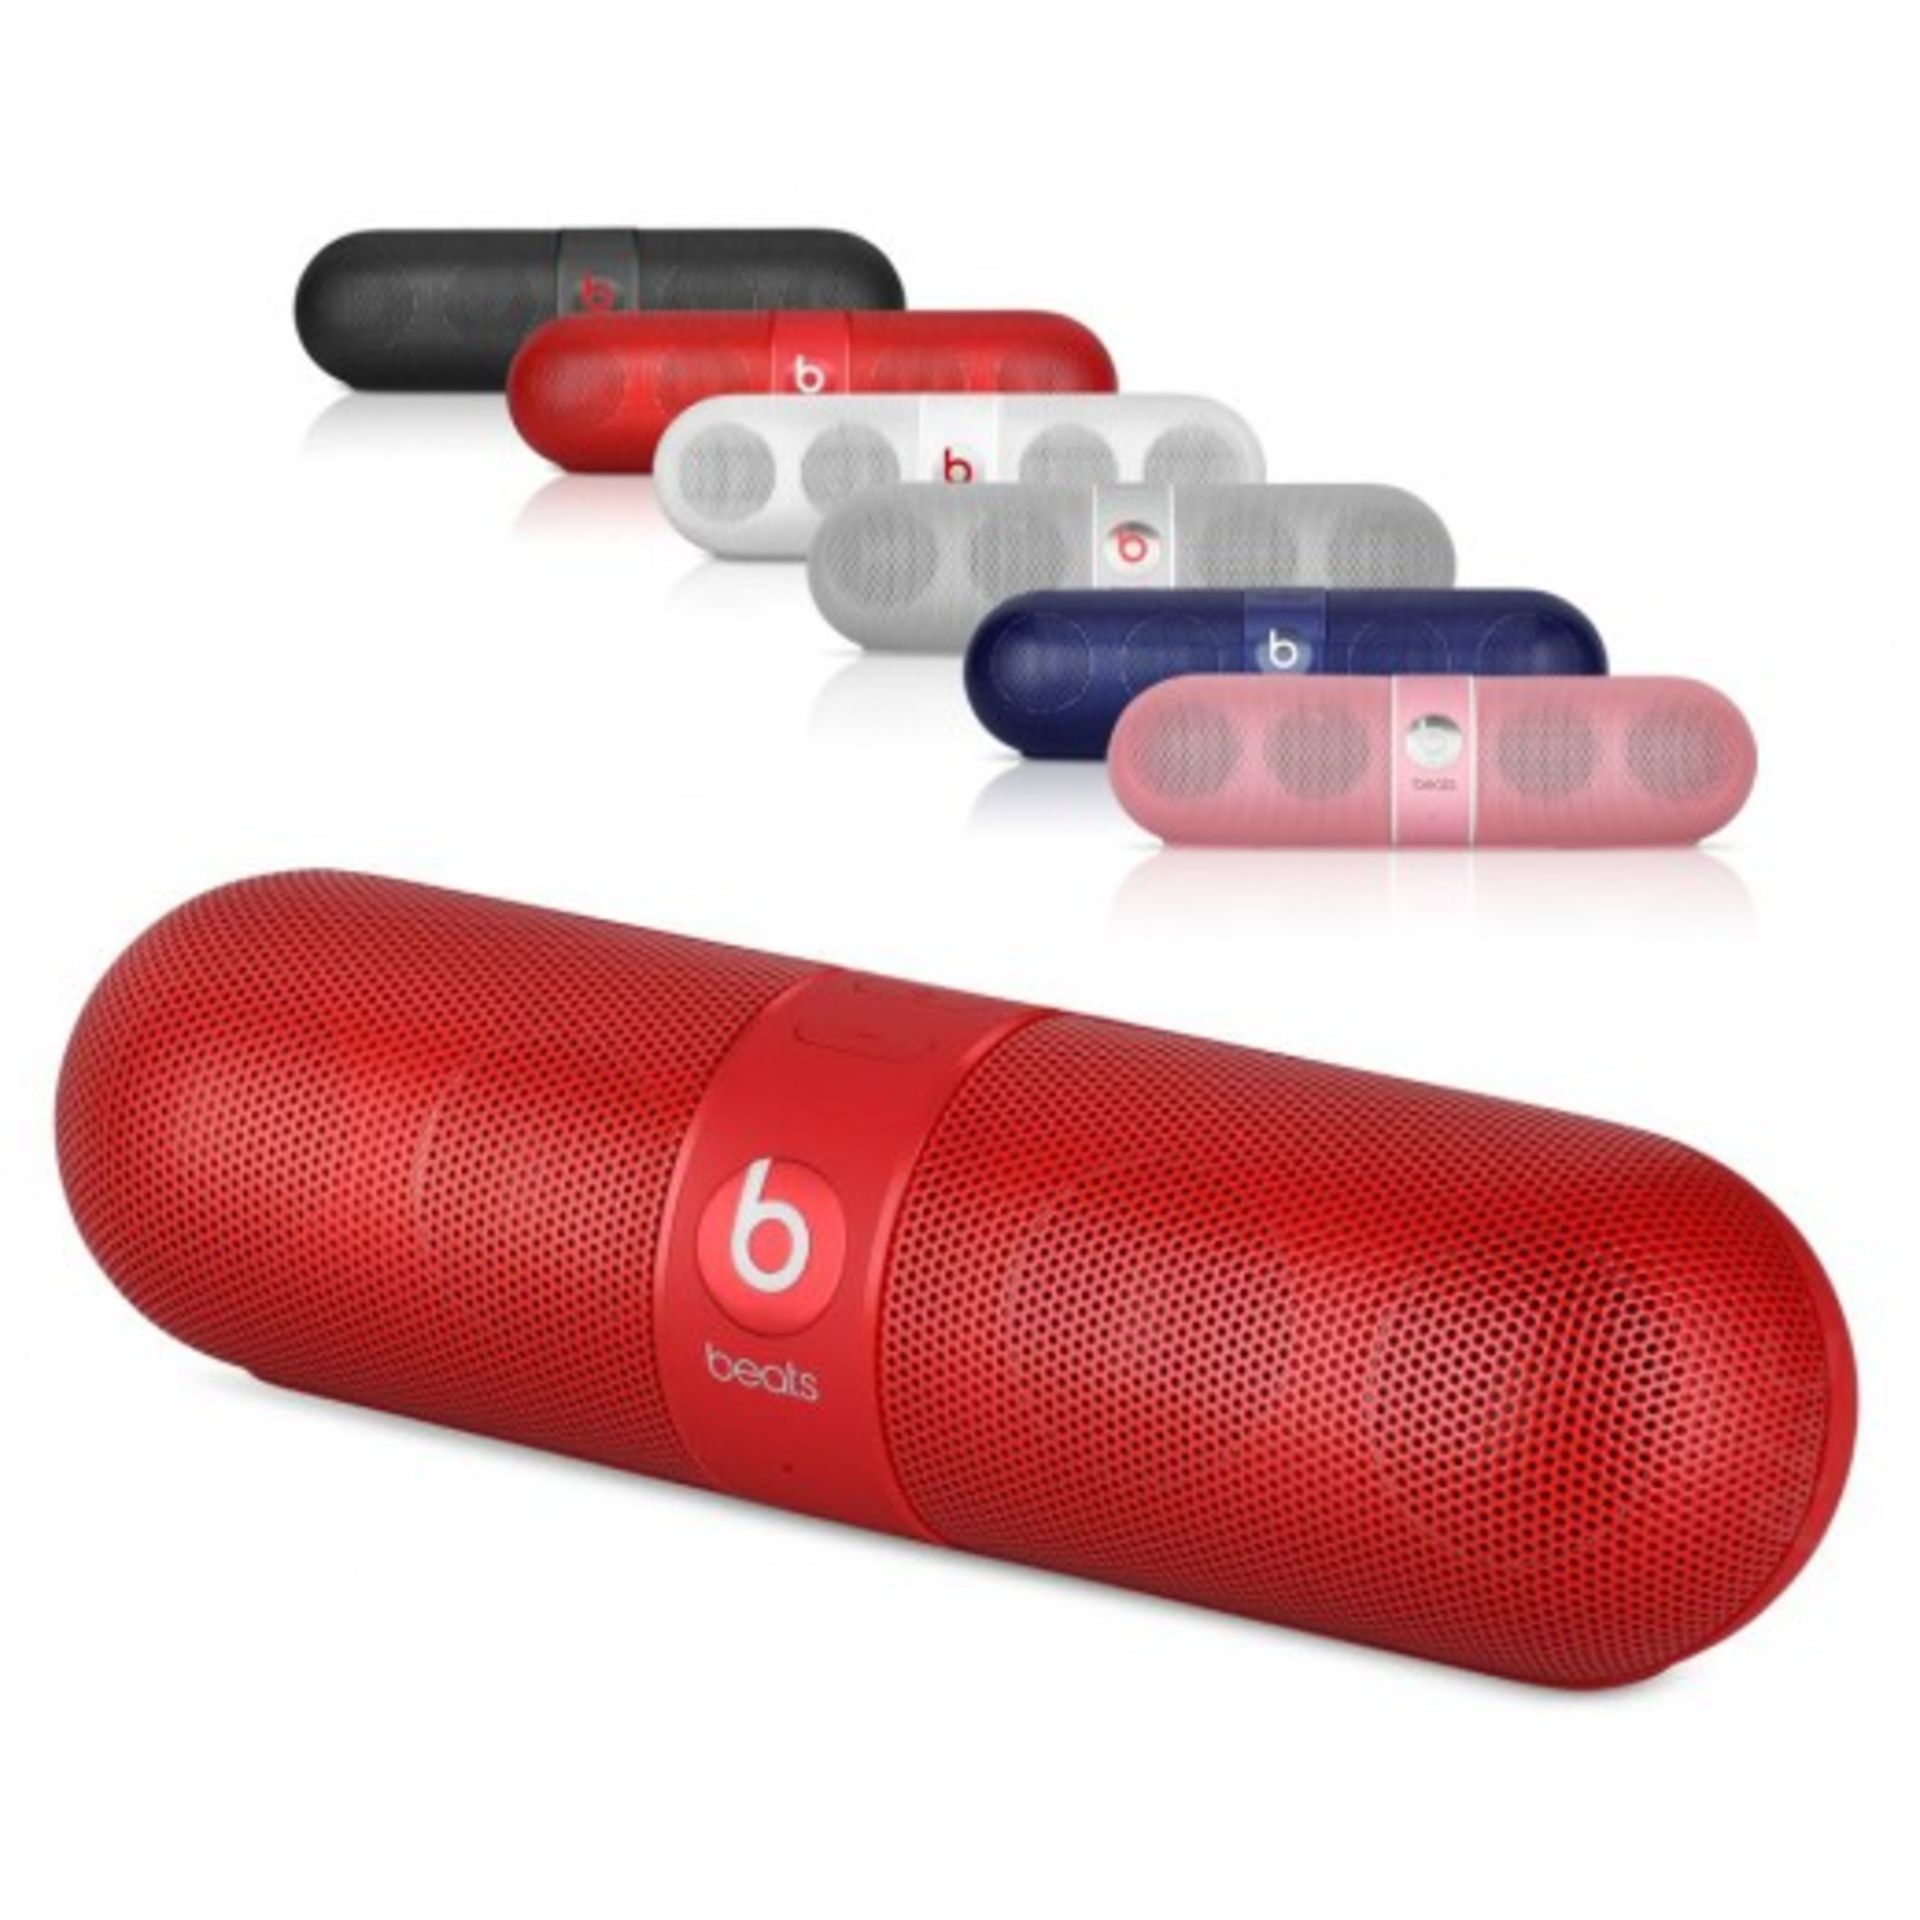 V Grade A Beats By Dre Pill 2.0 Speaker - Retail Boxed - Colours May Vary